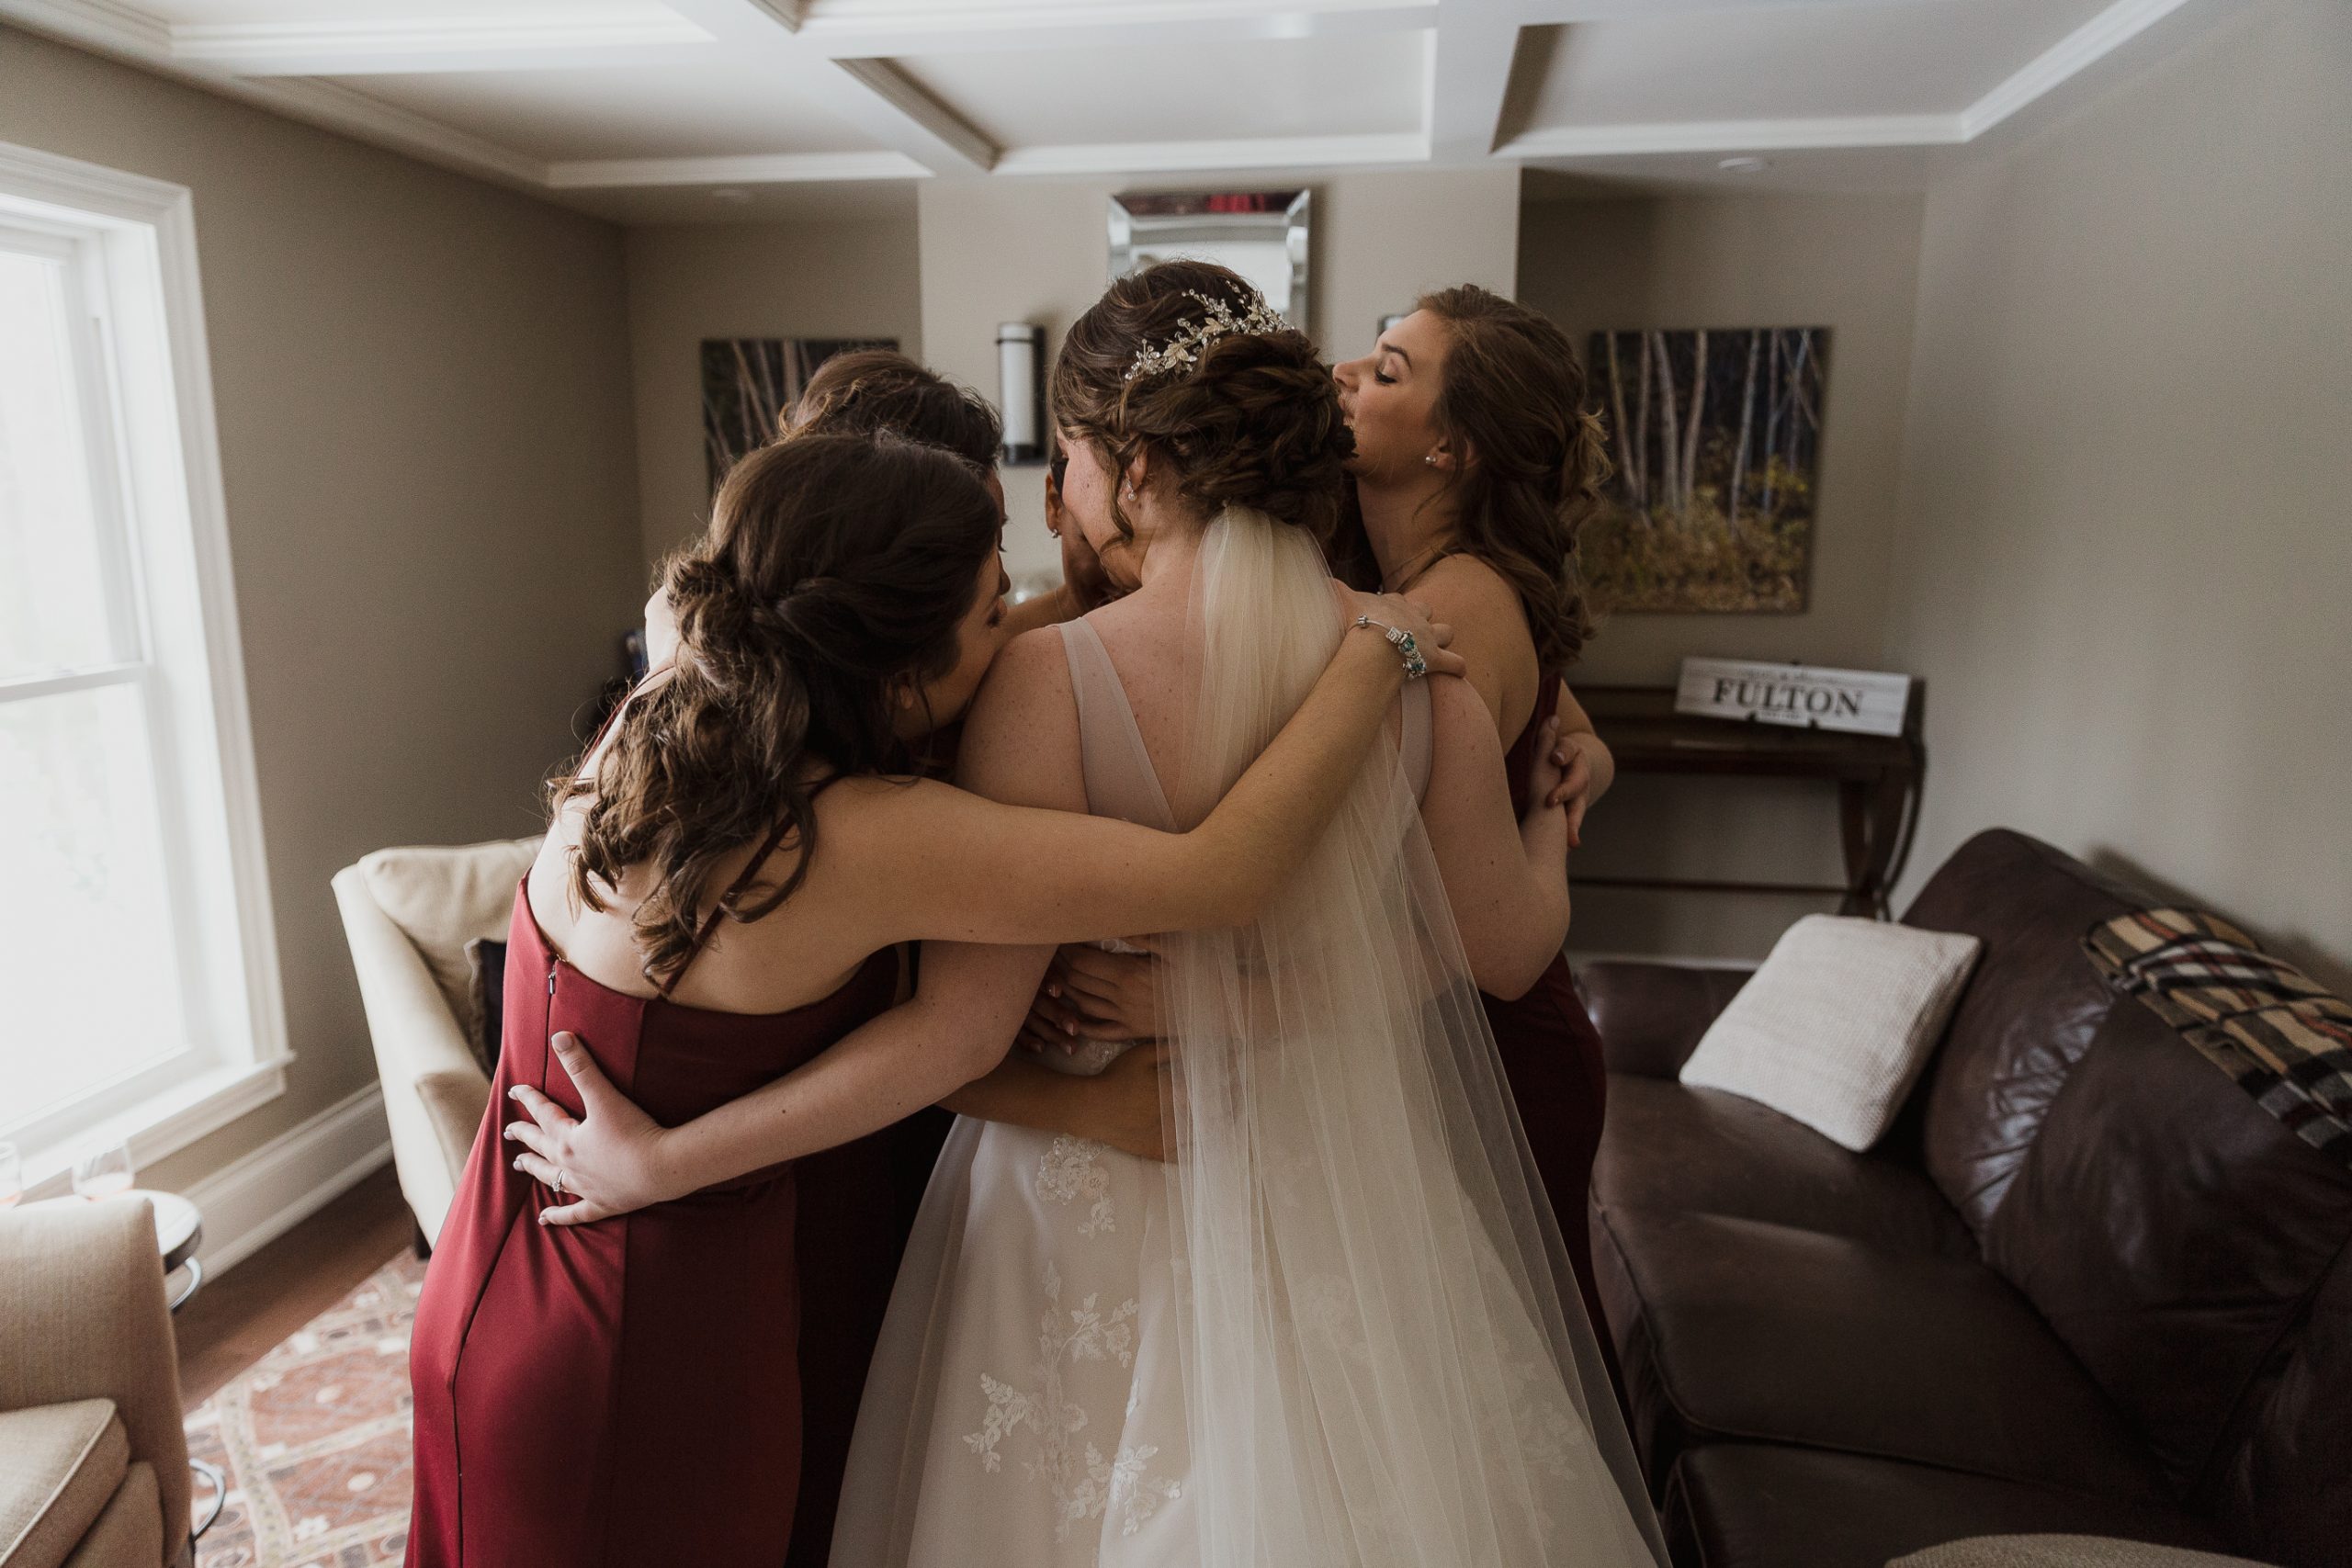 Wedding photos girls getting ready special moment between bride and bridesmaids, hugging